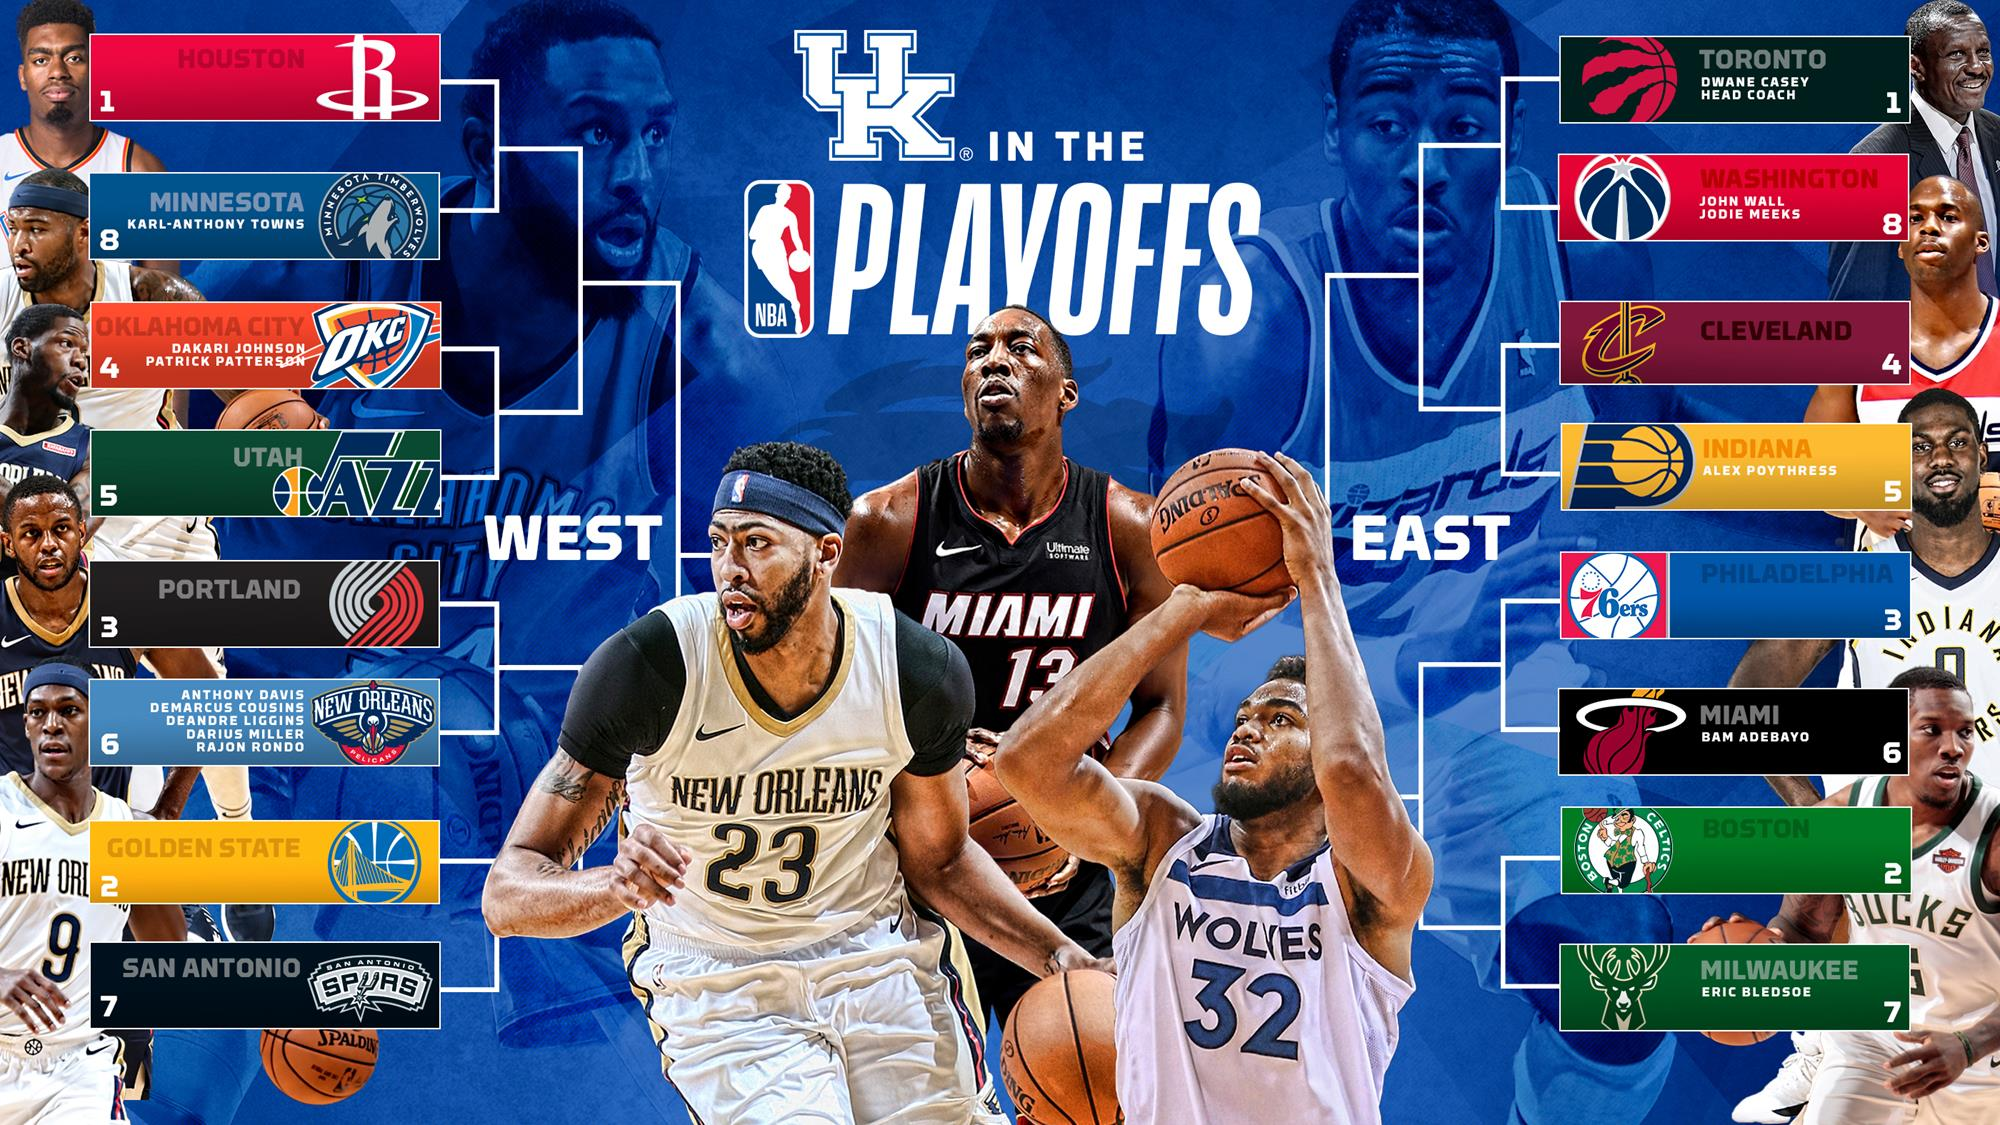 UK Men’s Basketball Leads Nation with 13 Players in NBA Playoffs